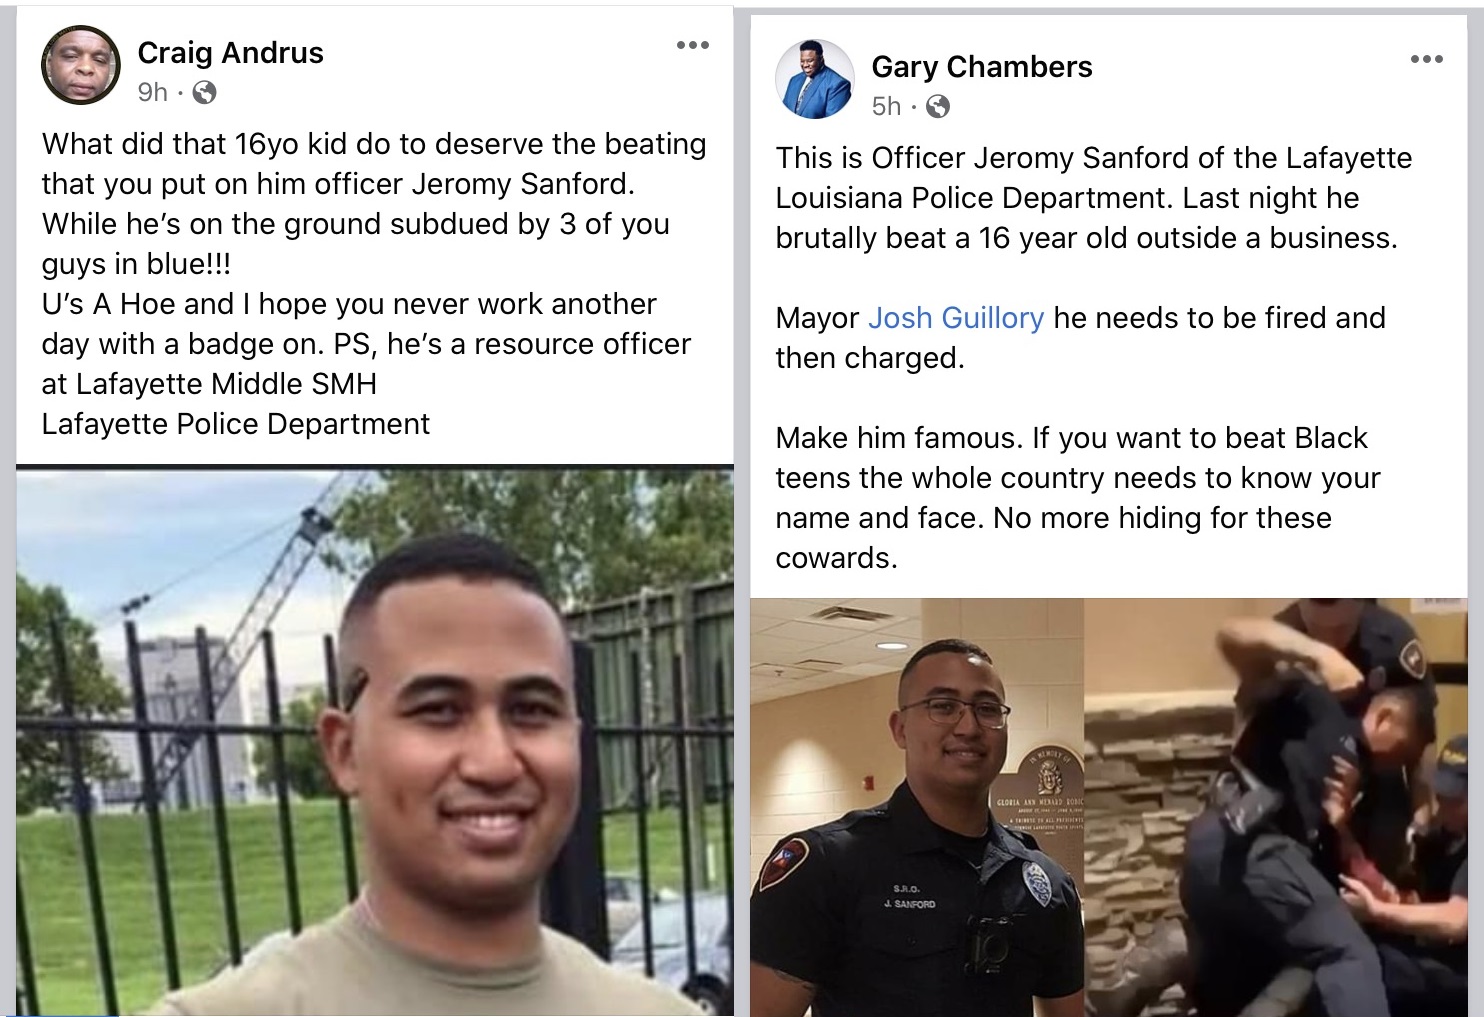 Jeromy Sanford has gone viral on Facebook, but not for good reasons. The Lafayette, Louisiana police officer was caught on camera beating a sixteen-year-old black teenager. On Facebook, people have identified him for beating the child, and calling on Lafayette's mayor to fire him, also exposing him as a school resource officer at Lafayette Middle School.